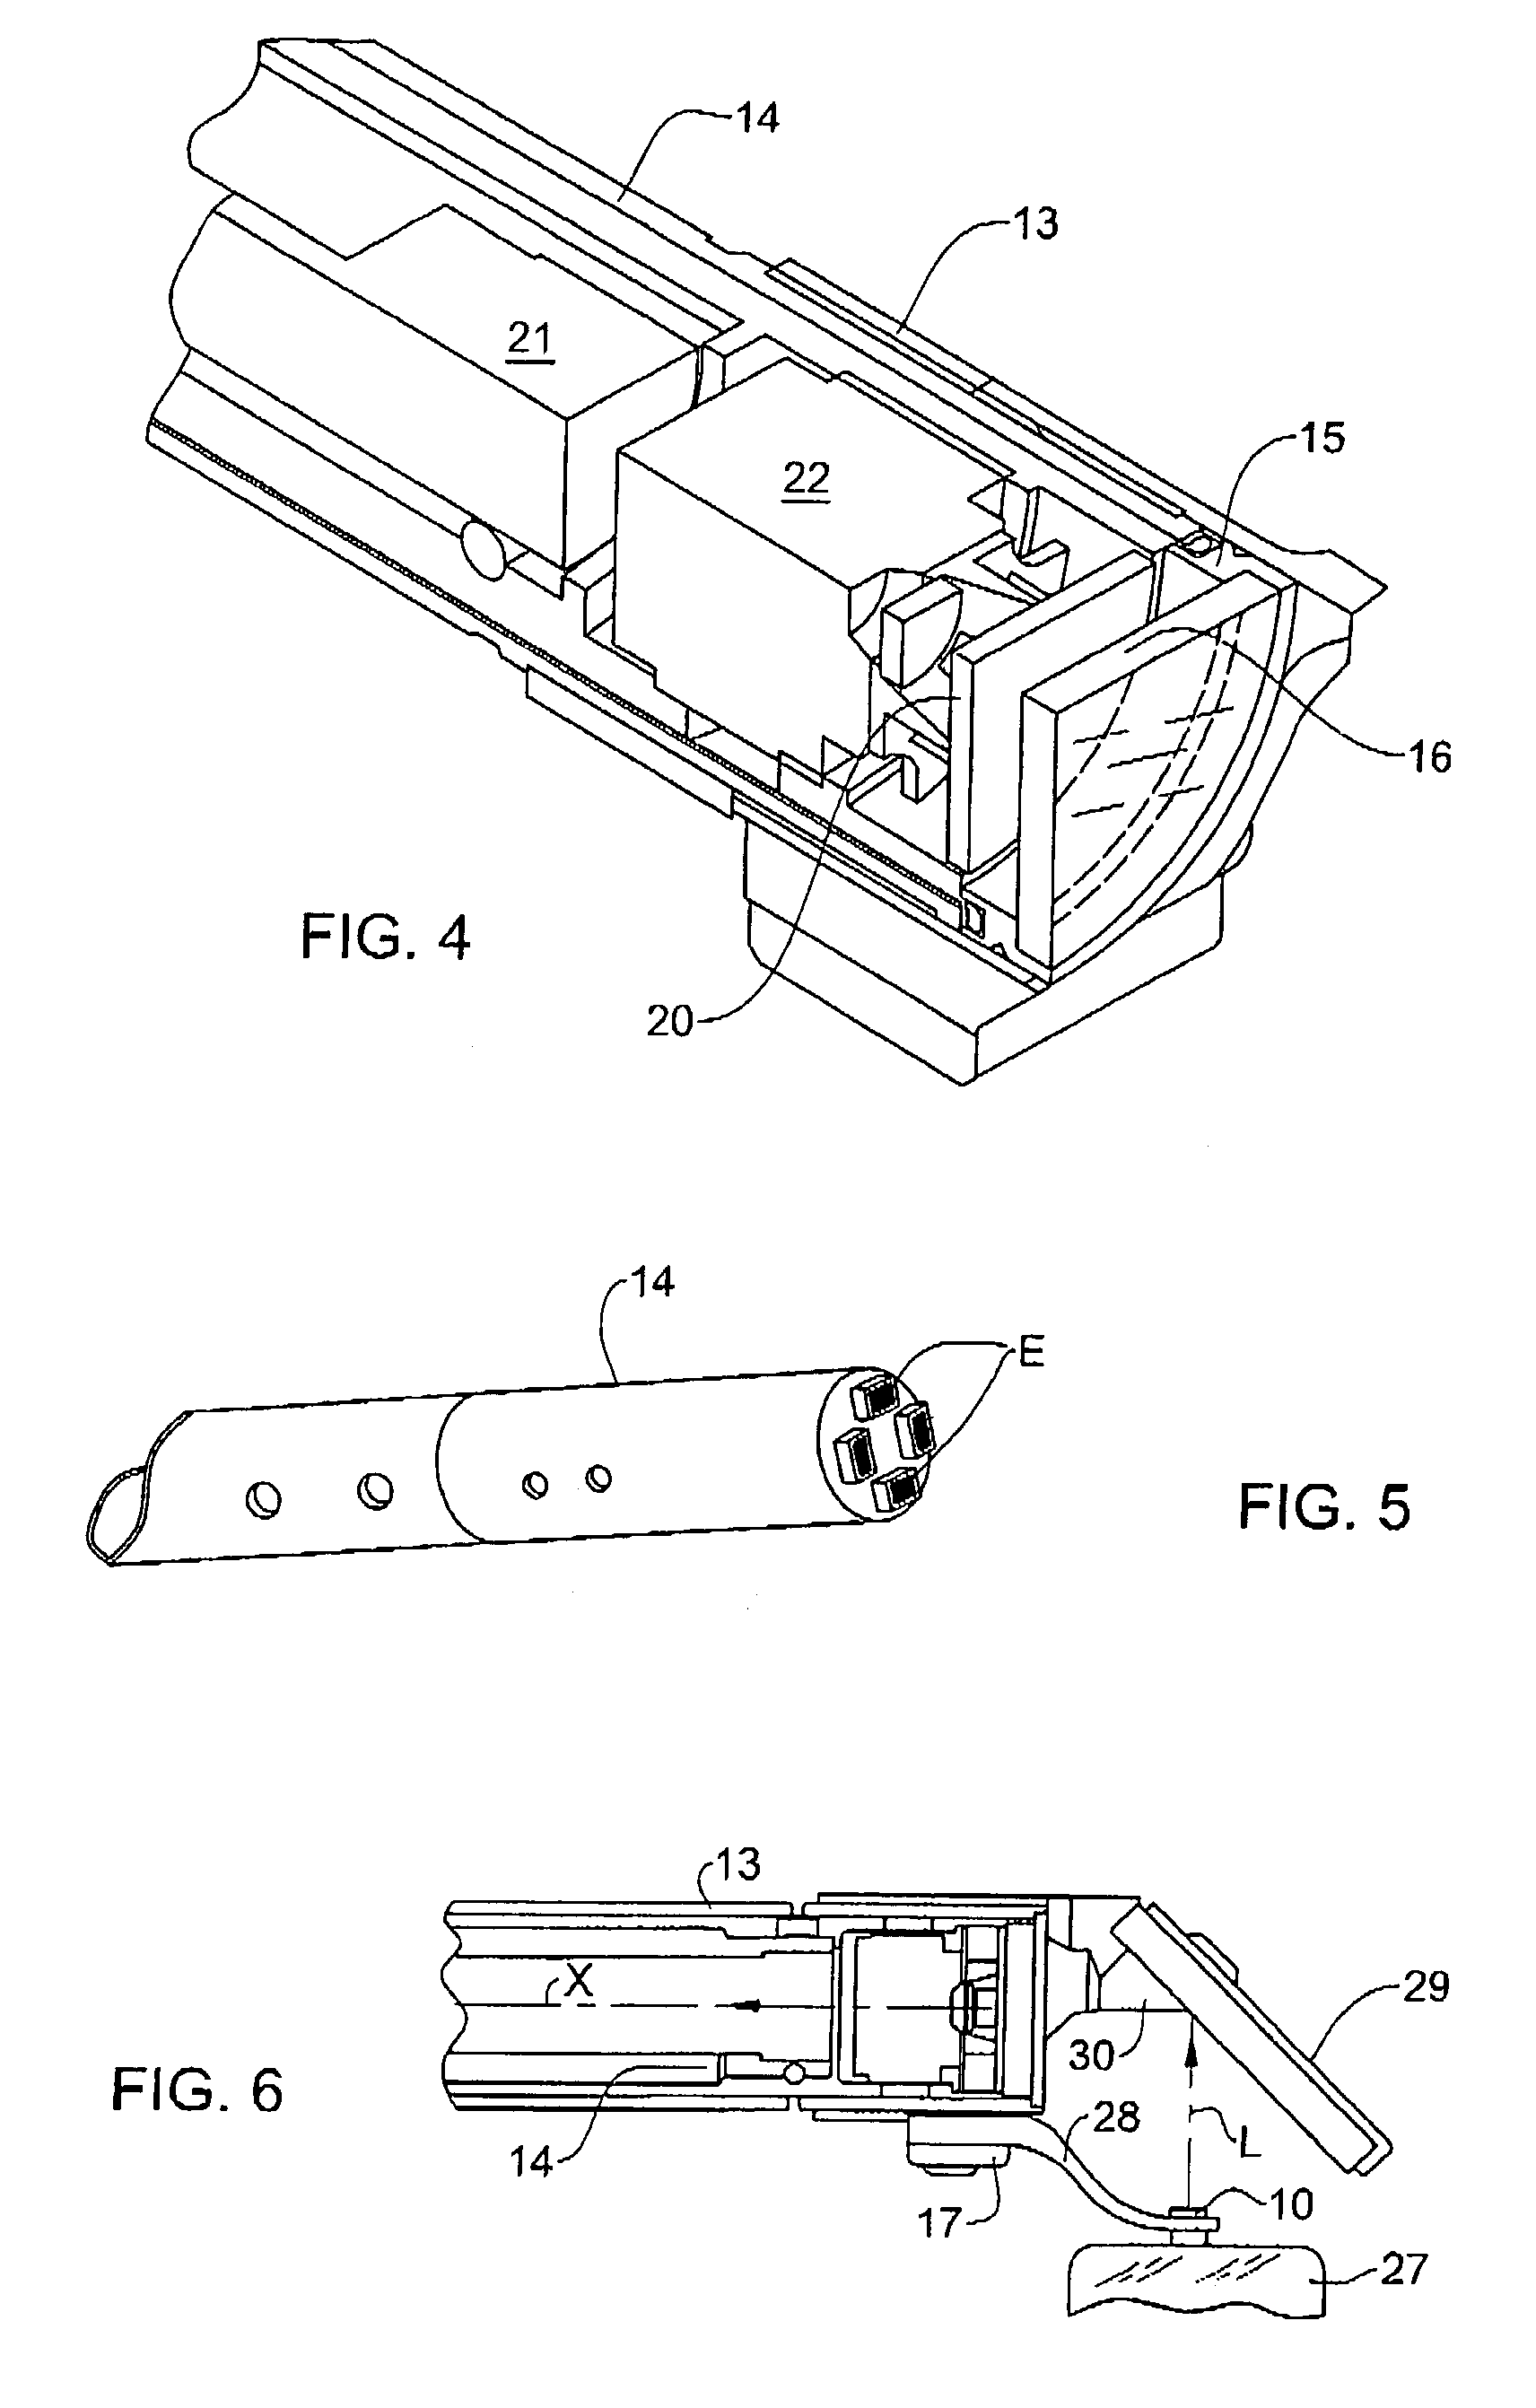 Appliance for positioning orthodontic components